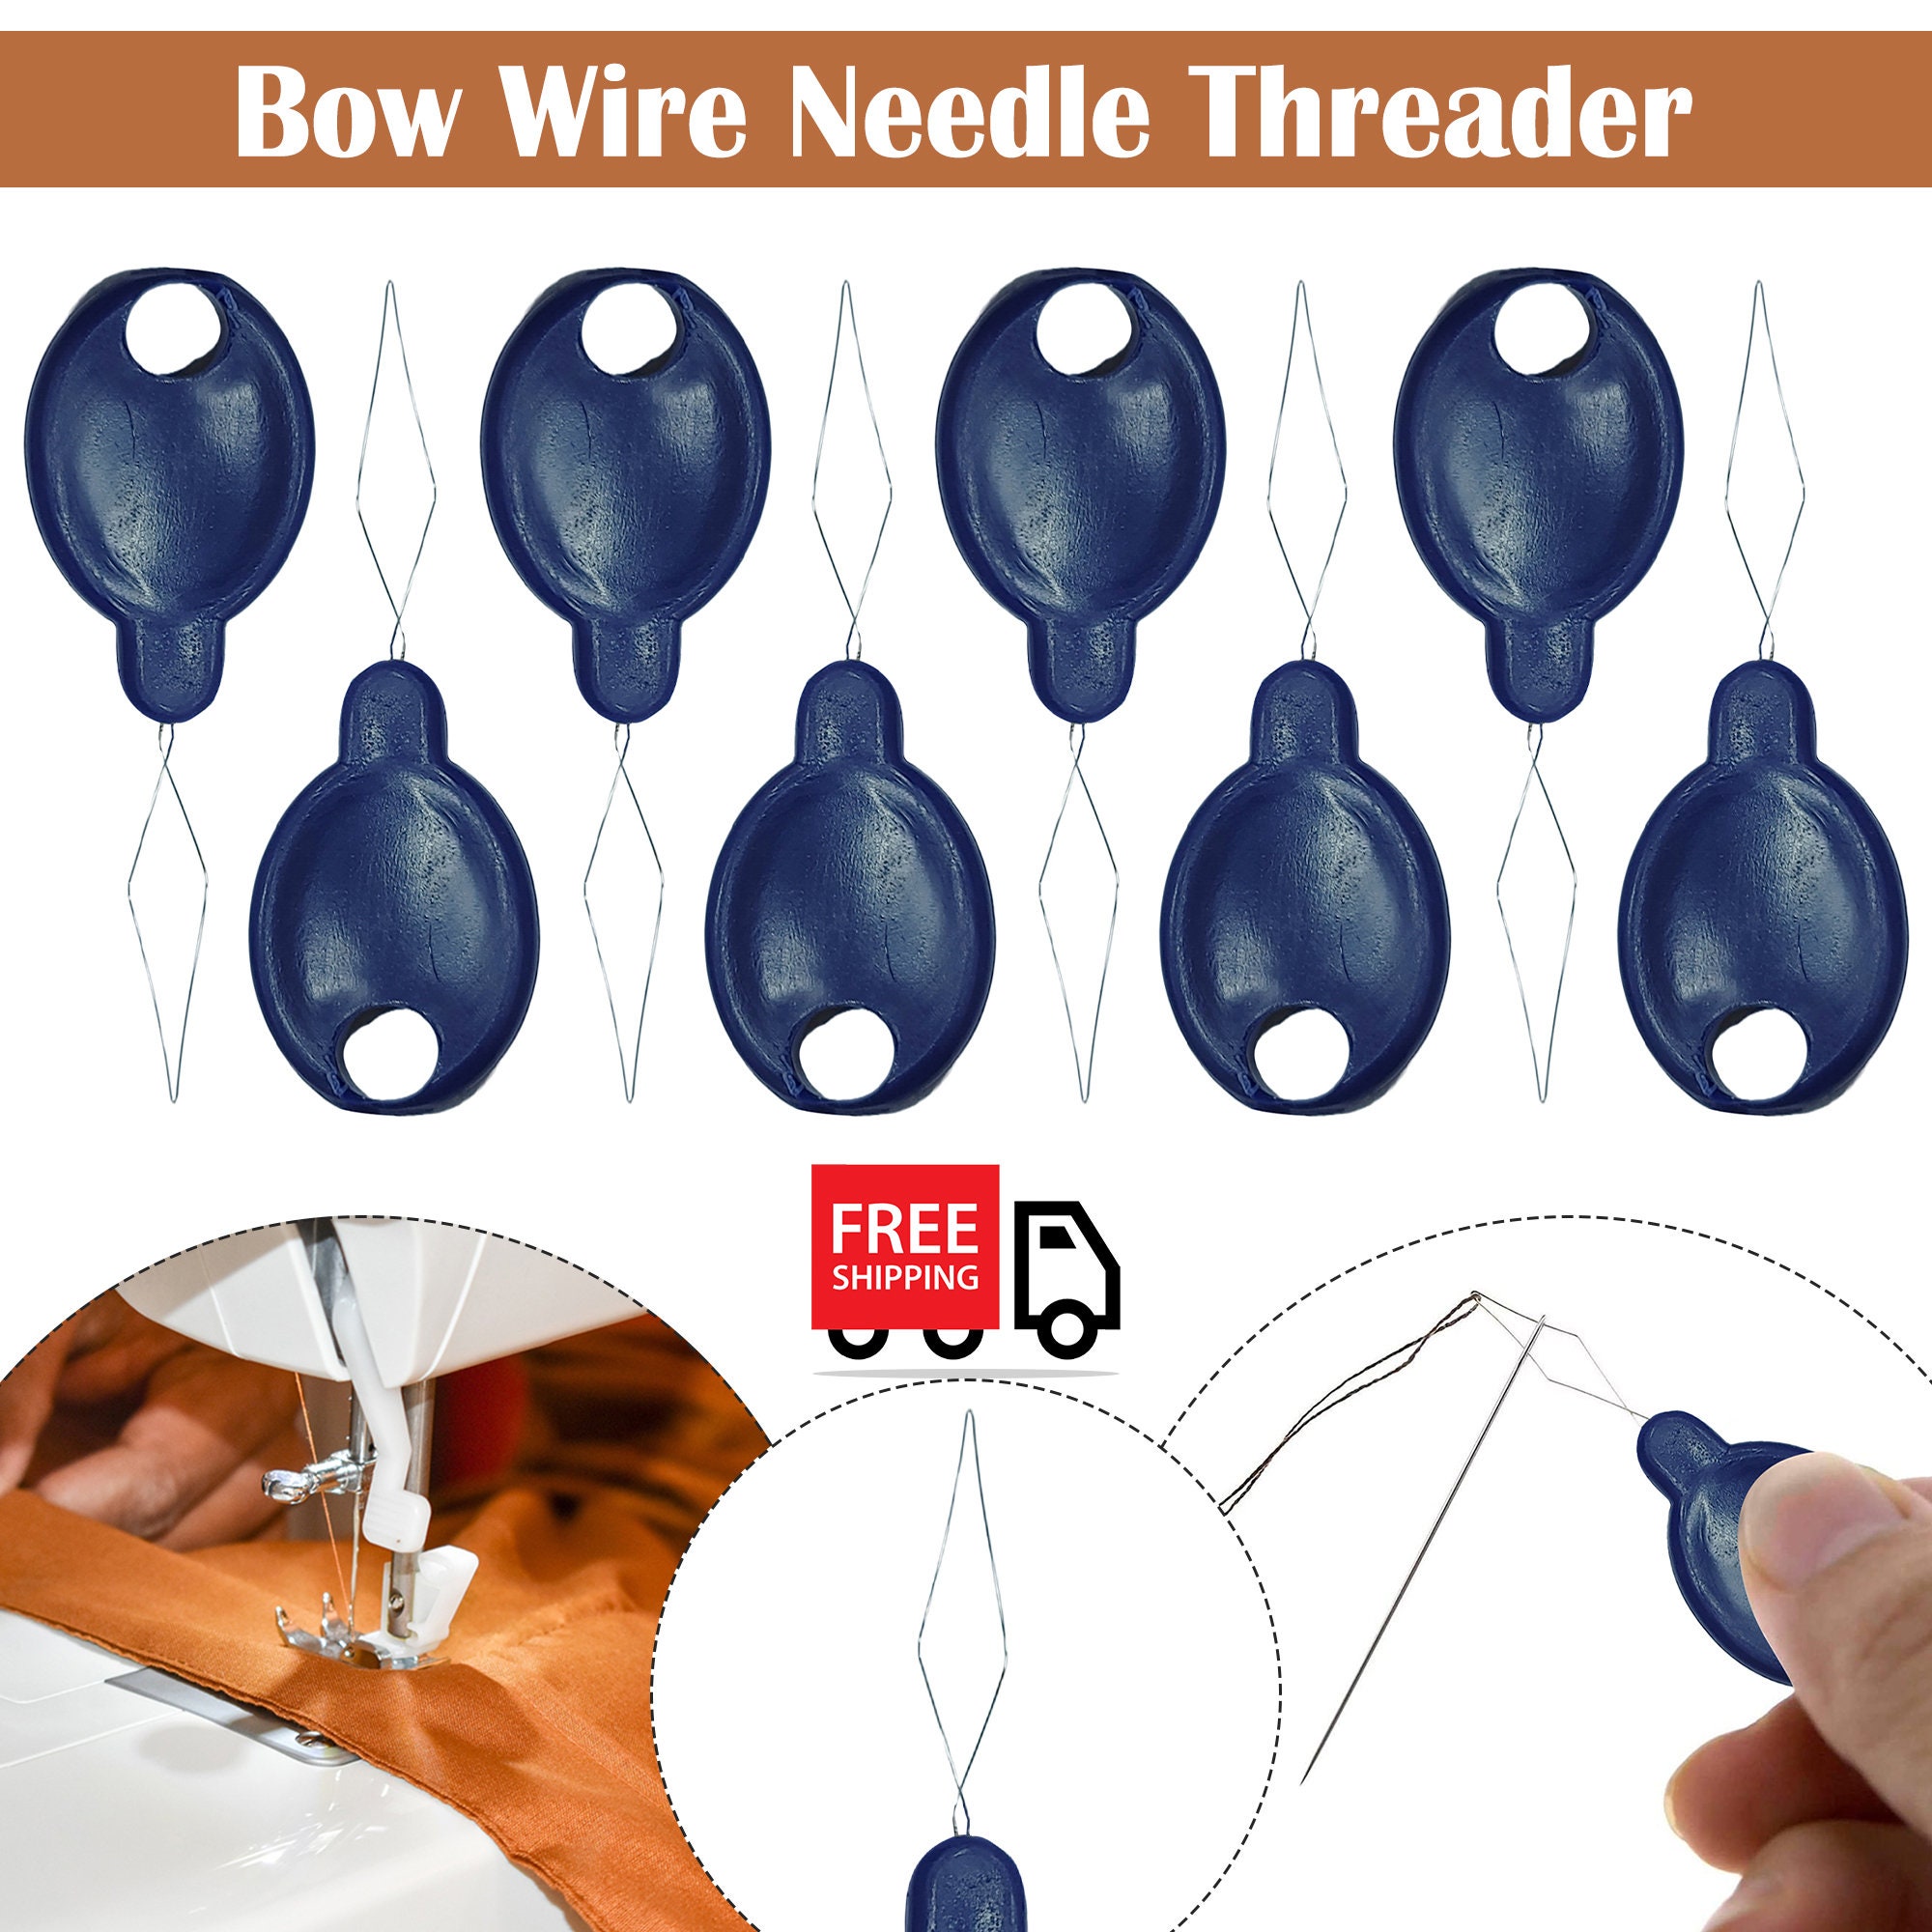  42 Pieces Plastic Needle Threaders, Gourd Shaped Wire